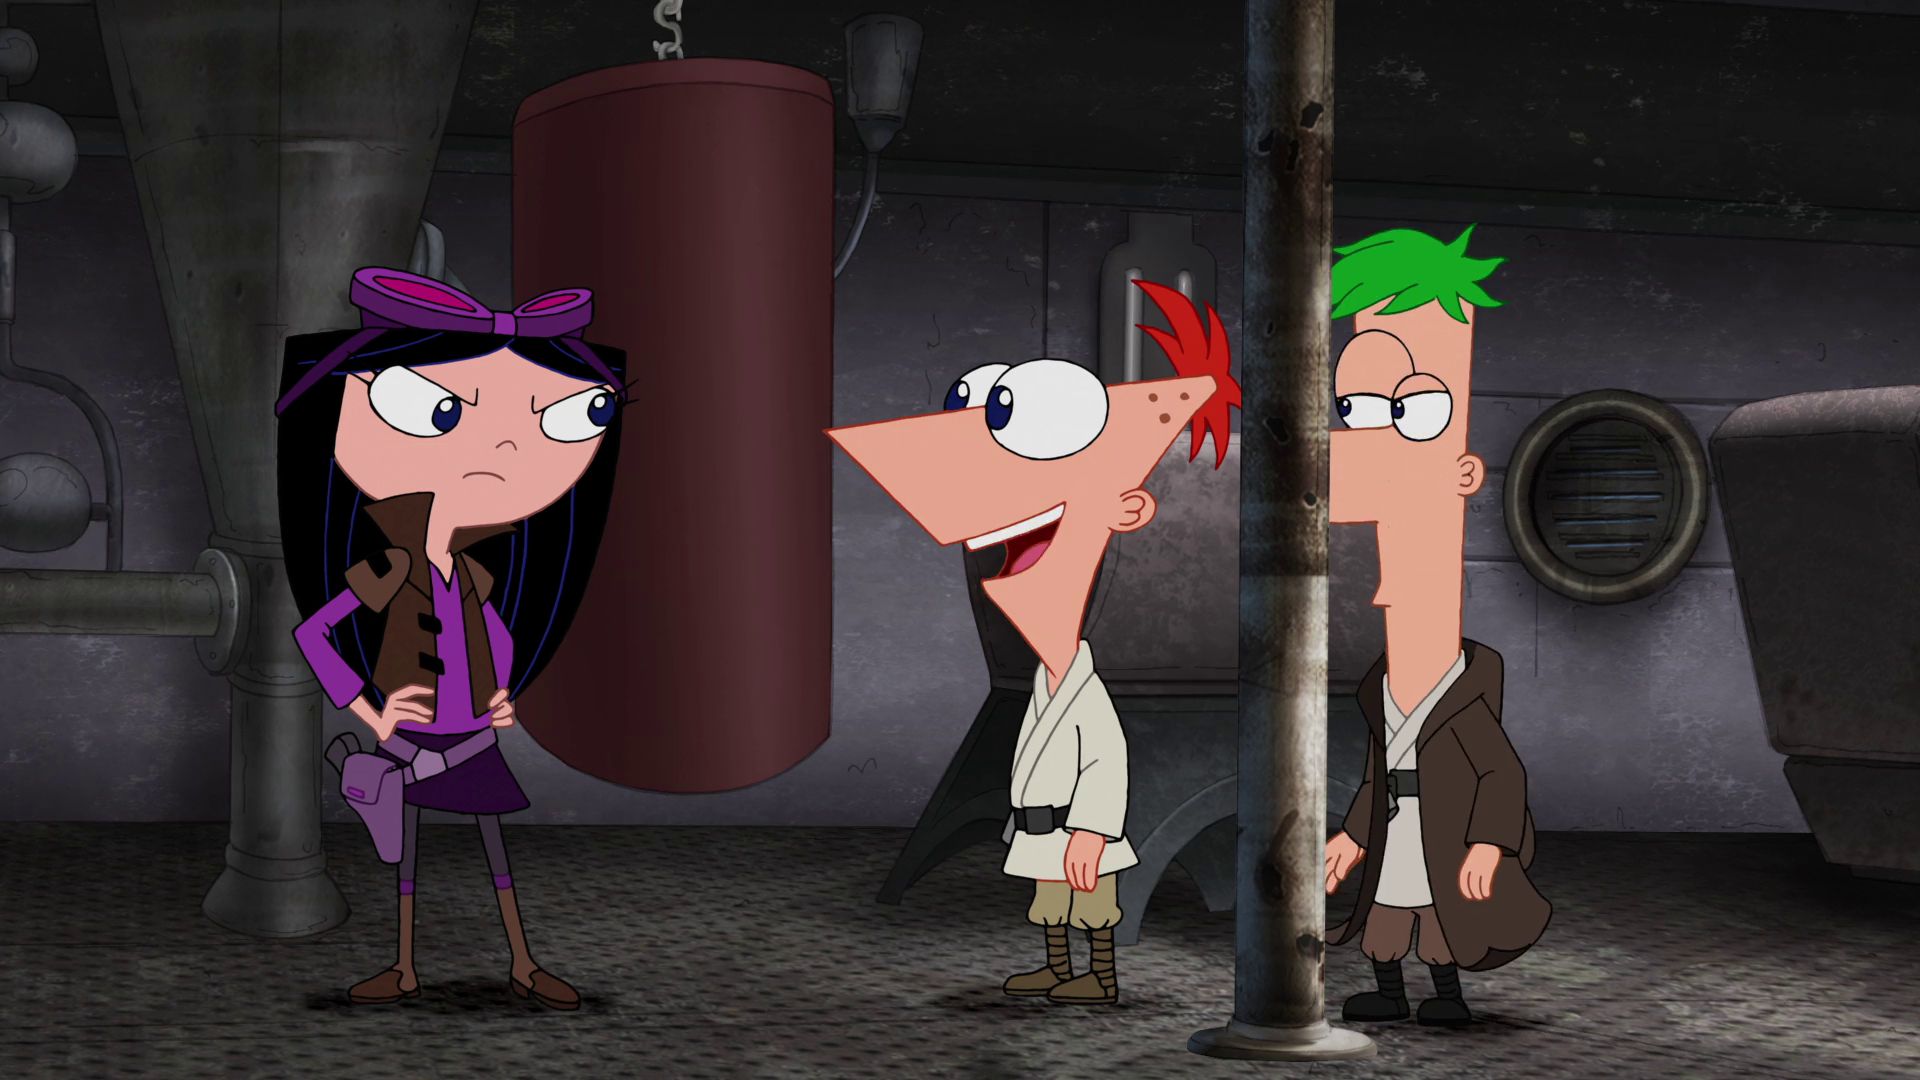 Phineas And Ferb Wikia hd wallpaper